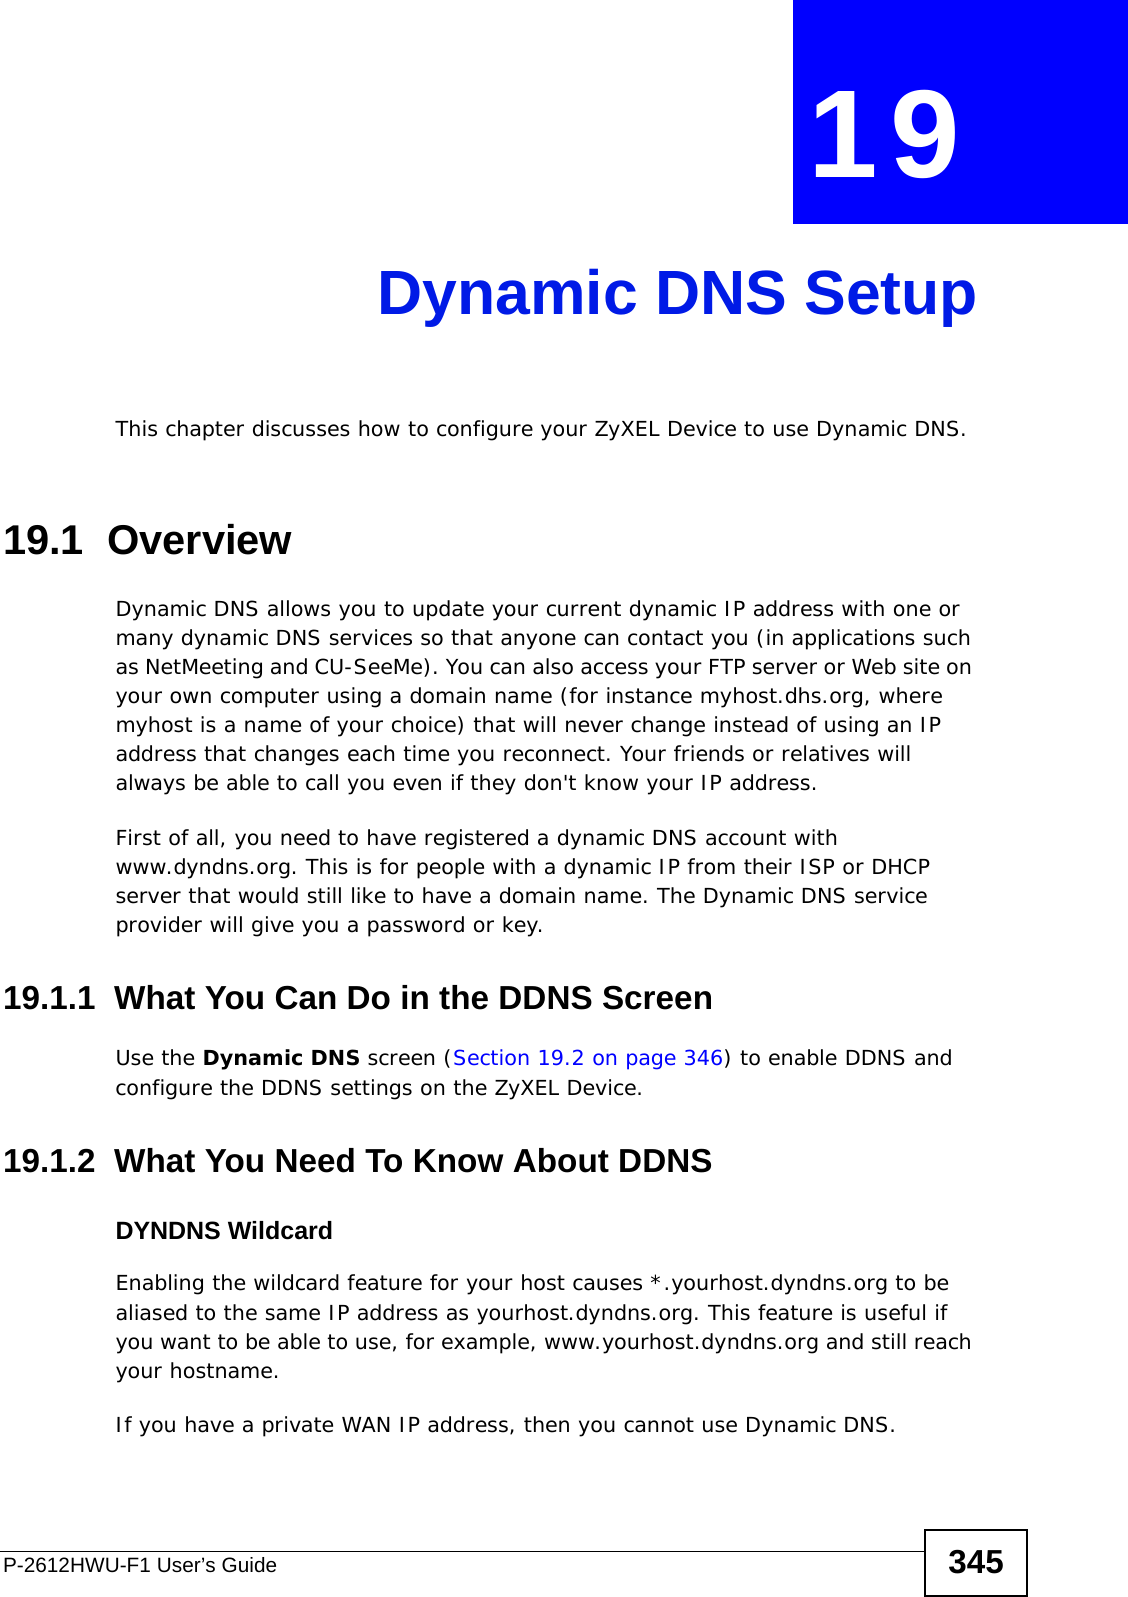 P-2612HWU-F1 User’s Guide 345CHAPTER  19 Dynamic DNS SetupThis chapter discusses how to configure your ZyXEL Device to use Dynamic DNS.19.1  Overview Dynamic DNS allows you to update your current dynamic IP address with one or many dynamic DNS services so that anyone can contact you (in applications such as NetMeeting and CU-SeeMe). You can also access your FTP server or Web site on your own computer using a domain name (for instance myhost.dhs.org, where myhost is a name of your choice) that will never change instead of using an IP address that changes each time you reconnect. Your friends or relatives will always be able to call you even if they don&apos;t know your IP address.First of all, you need to have registered a dynamic DNS account with www.dyndns.org. This is for people with a dynamic IP from their ISP or DHCP server that would still like to have a domain name. The Dynamic DNS service provider will give you a password or key. 19.1.1  What You Can Do in the DDNS ScreenUse the Dynamic DNS screen (Section 19.2 on page 346) to enable DDNS and configure the DDNS settings on the ZyXEL Device.19.1.2  What You Need To Know About DDNSDYNDNS WildcardEnabling the wildcard feature for your host causes *.yourhost.dyndns.org to be aliased to the same IP address as yourhost.dyndns.org. This feature is useful if you want to be able to use, for example, www.yourhost.dyndns.org and still reach your hostname.If you have a private WAN IP address, then you cannot use Dynamic DNS.